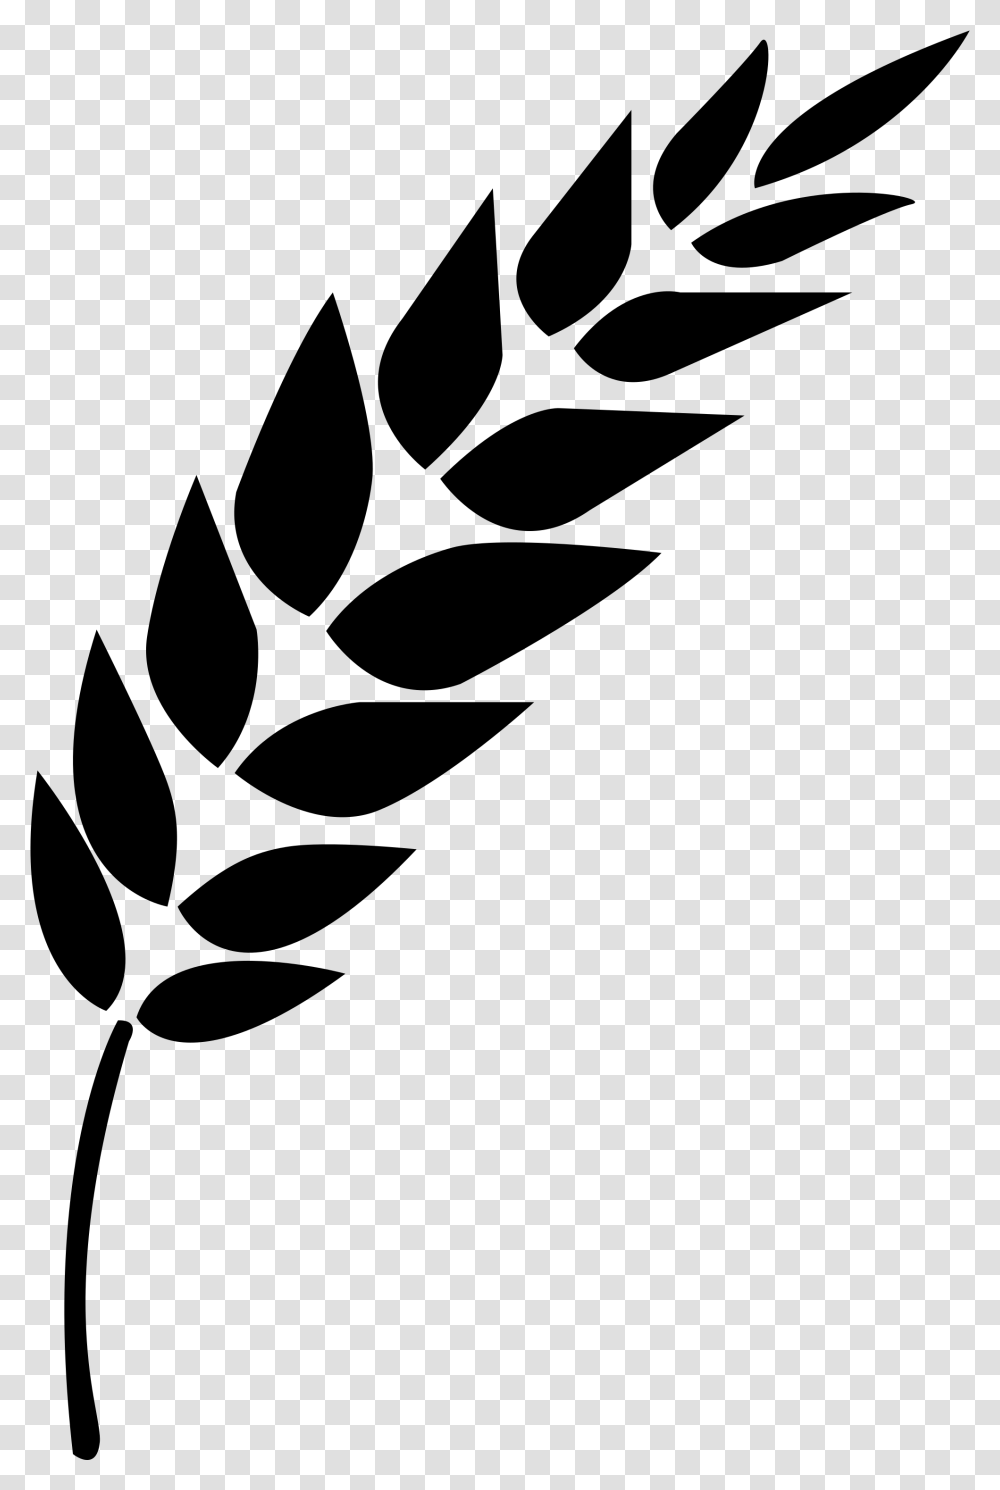 Black And White Wheat Stalk Clipart Download Icon Vector Wheat, Gray Transparent Png